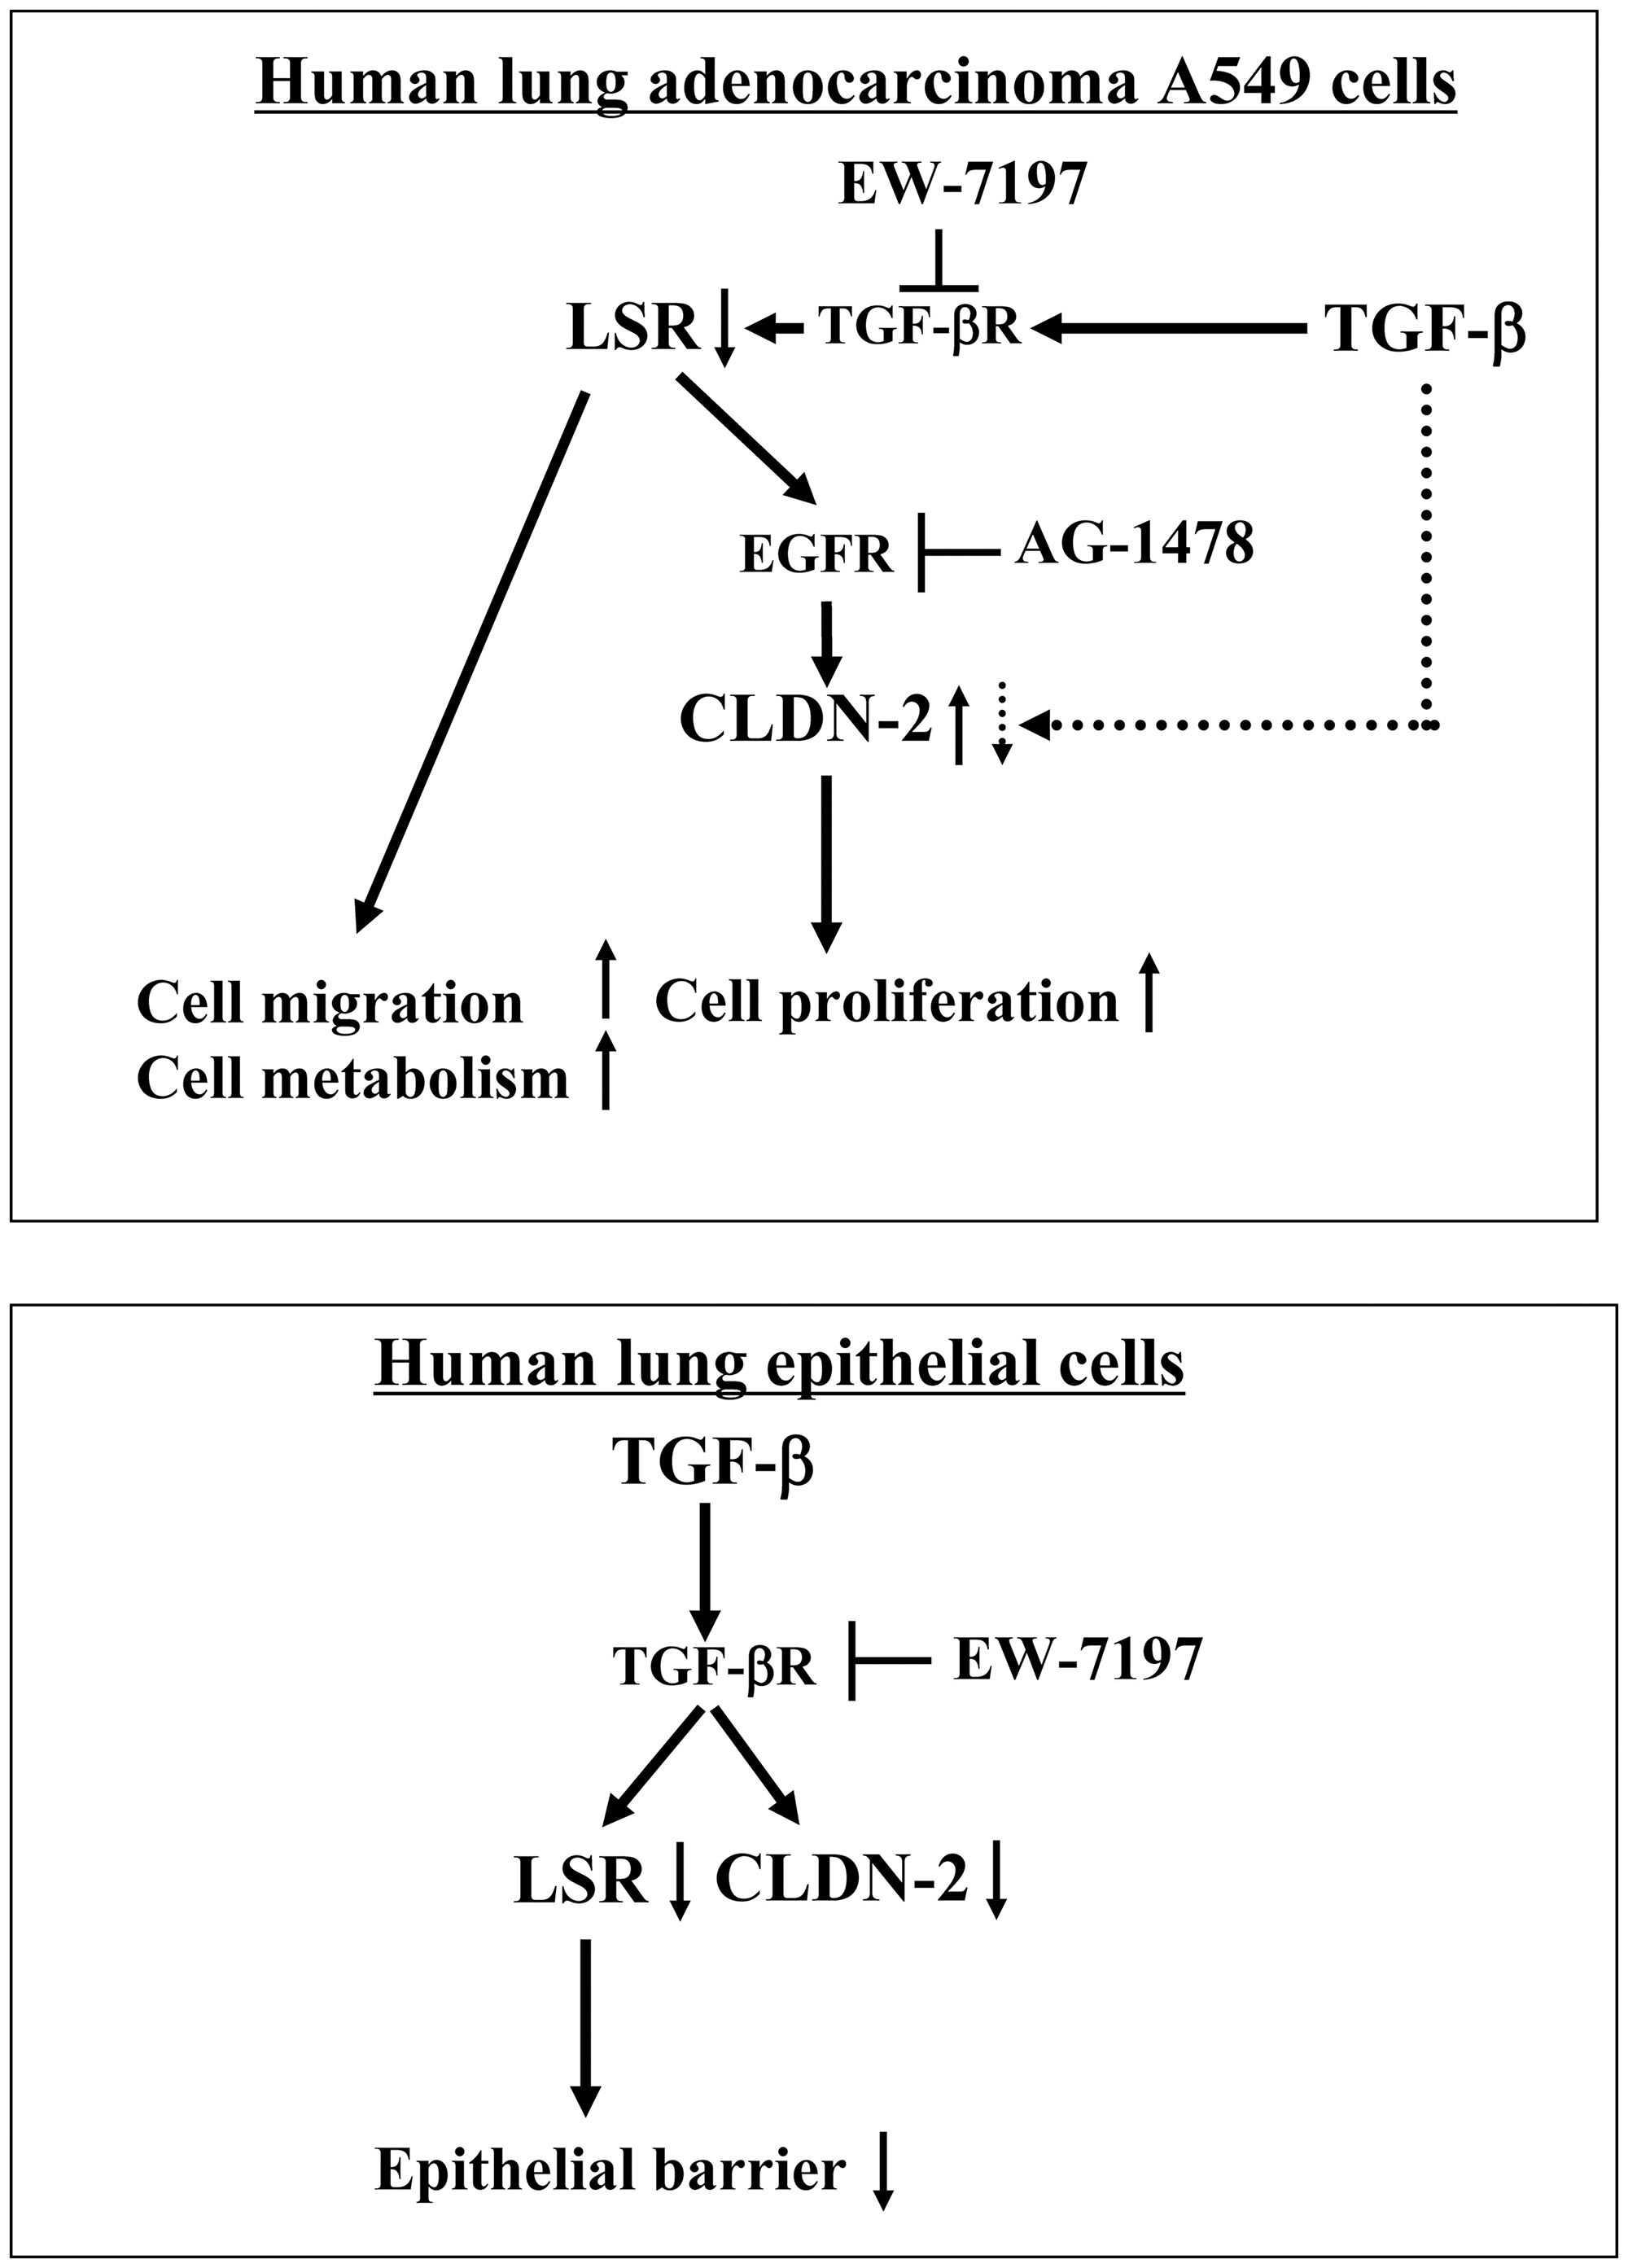 Role and behavior of LSR and CLDN-2 via signaling pathways in human adenocarcinoma A549 cells and normal lung epithelial cells.